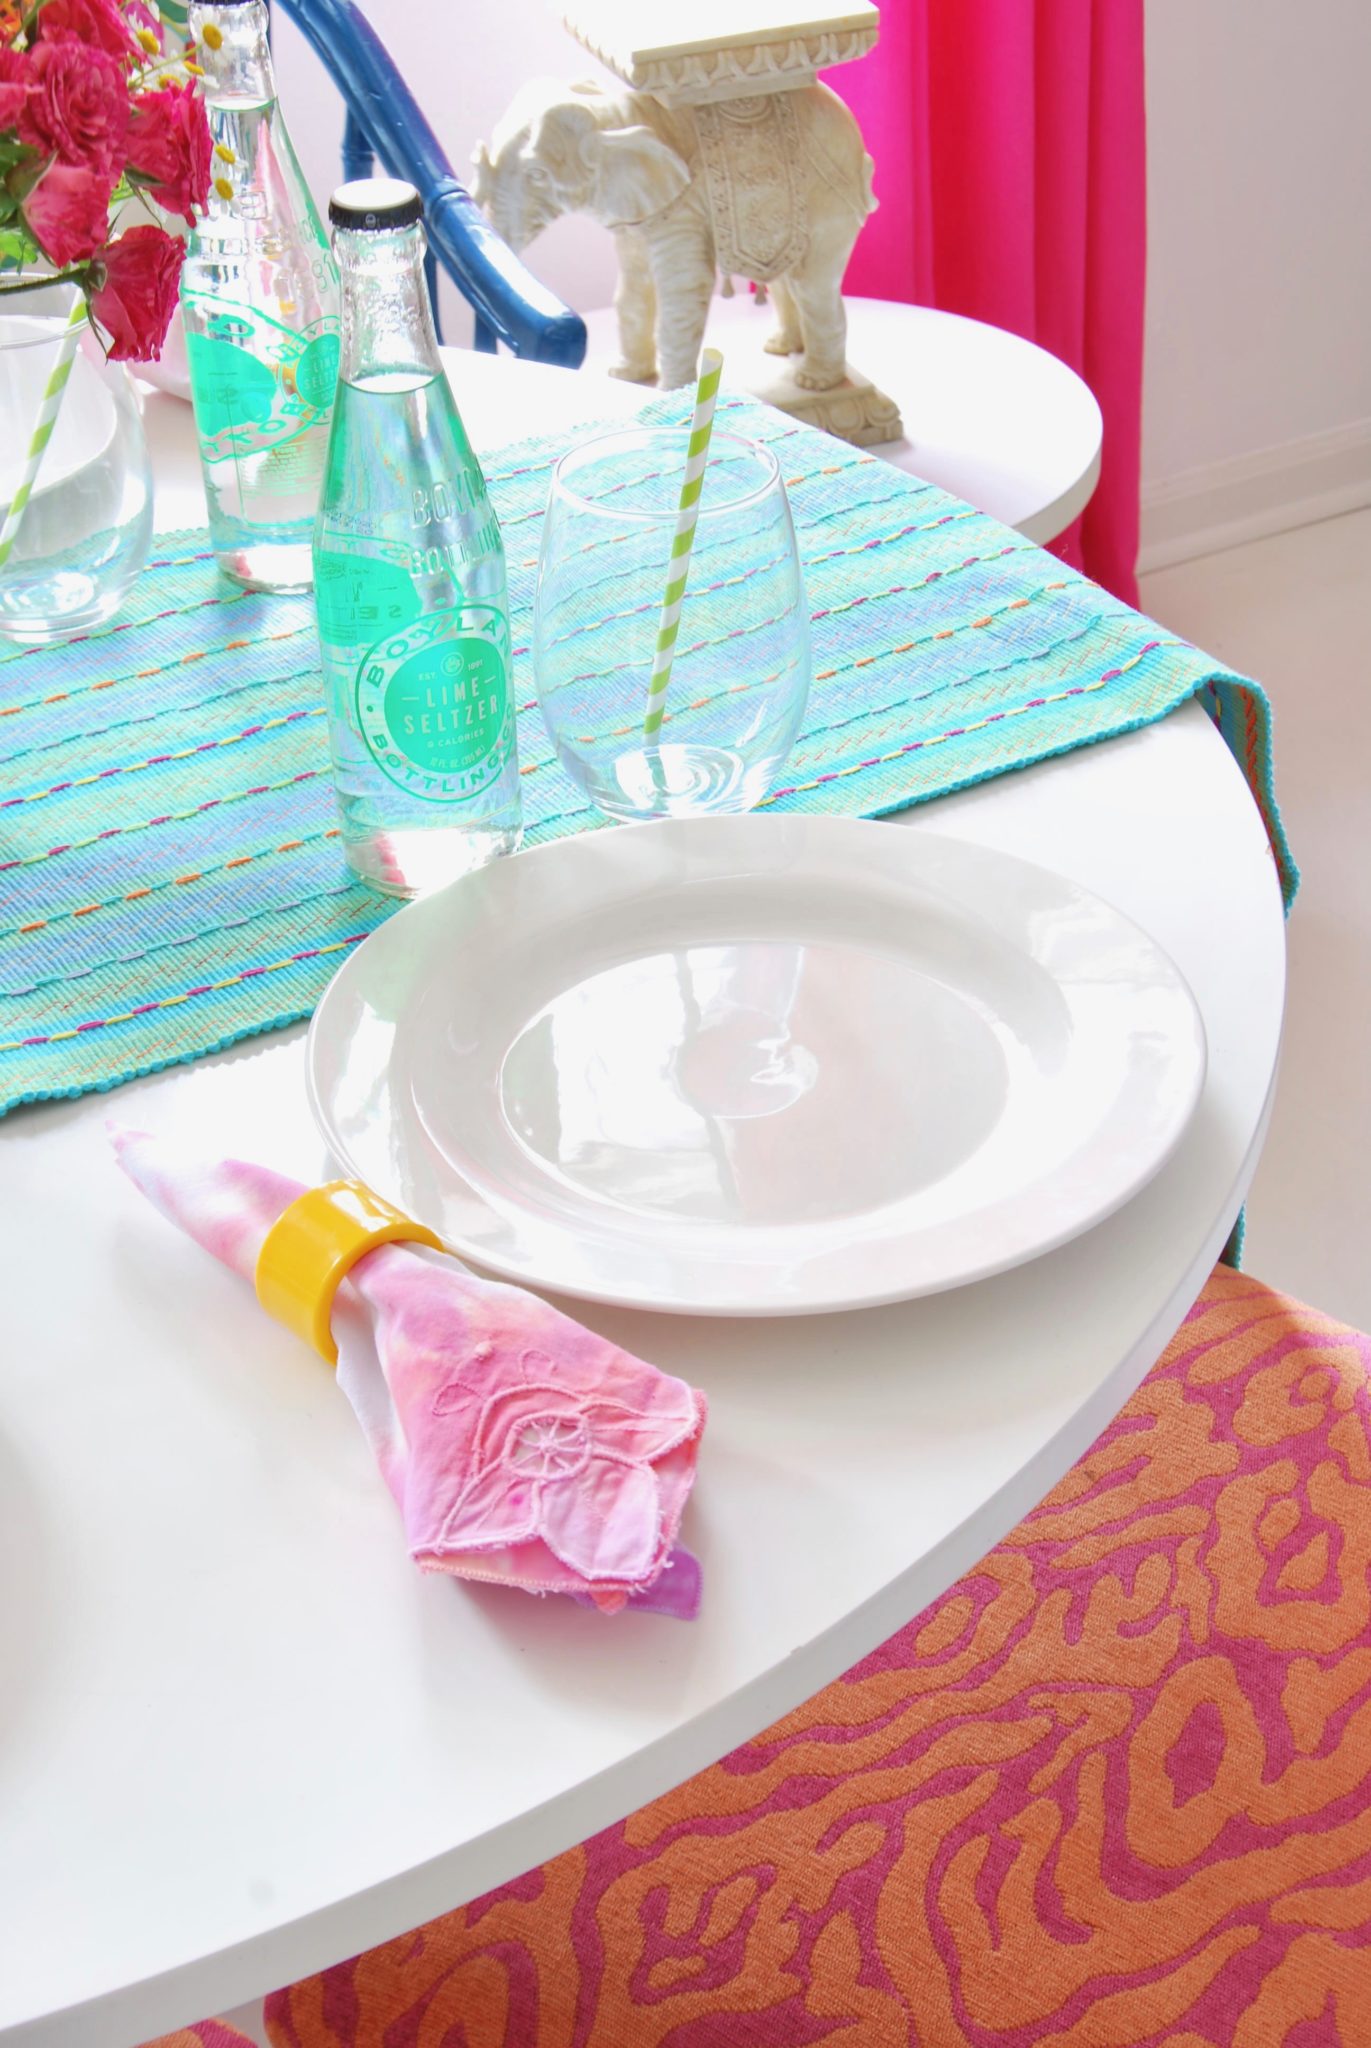 DIY Drop Cloth Napkins You'll Want To Use Everyday - Do Dodson Designs